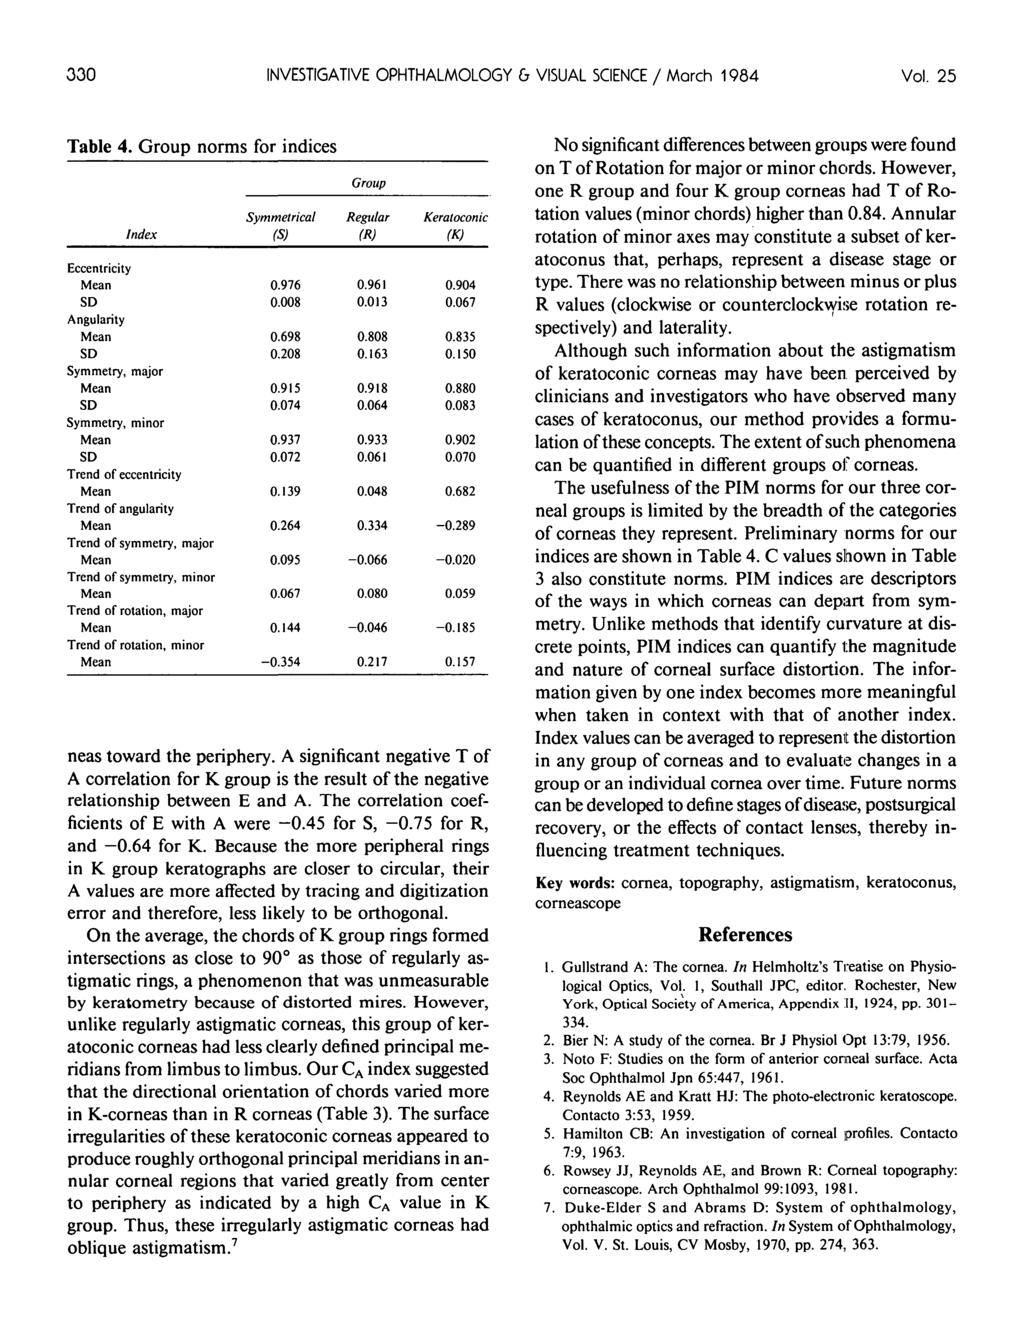 330 INVESTIGATIVE OPHTHALMOLOGY & VISUAL SCIENCE / March 1984 Vol. 25 Table 4. Group norms for indices Index Group Symmetrical Regular Keratoconic (S) (R) (K) Eccentricity Mean 0.976 0.961 0.904 SD 0.